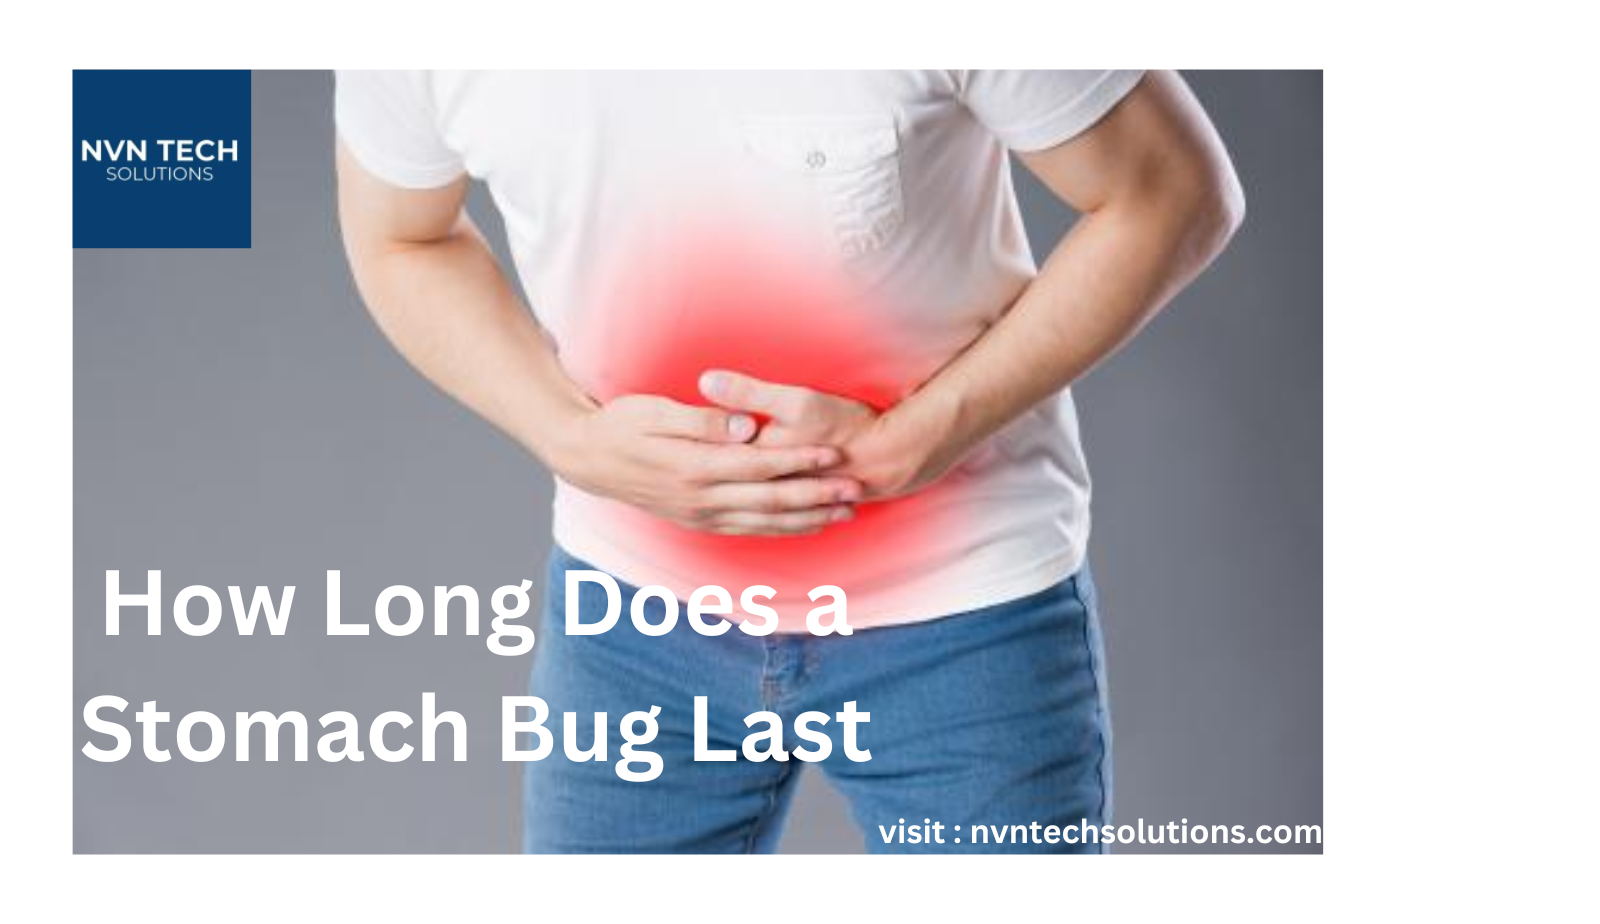 The Duration of Stomach Bugs How Long Does a Stomach Bug Last? by Nvn